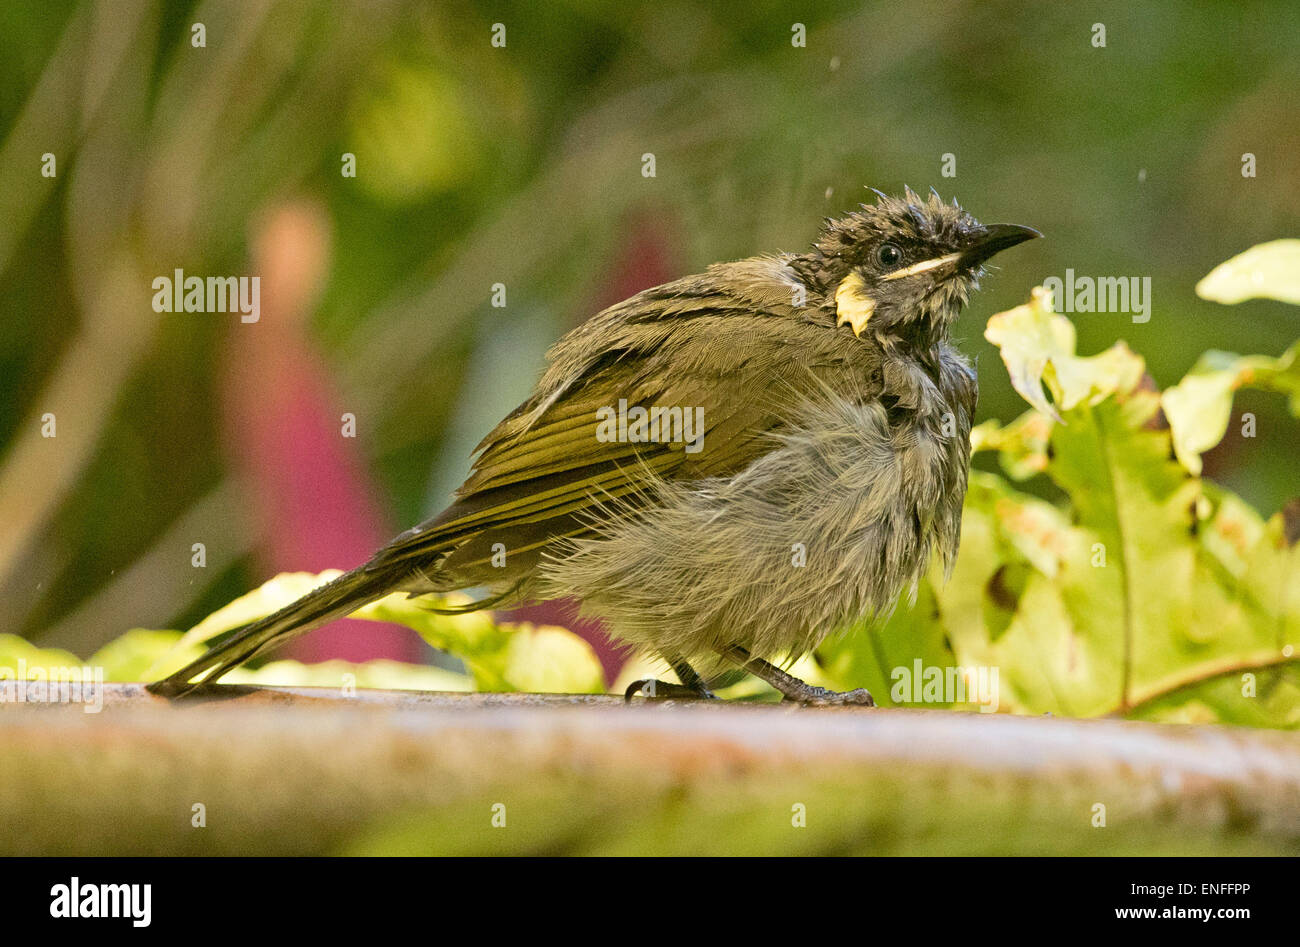 Australian brown honeyeater, Lichmera indistincta, on edge of bird bath with feathers soaking wet after bathing in water Stock Photo